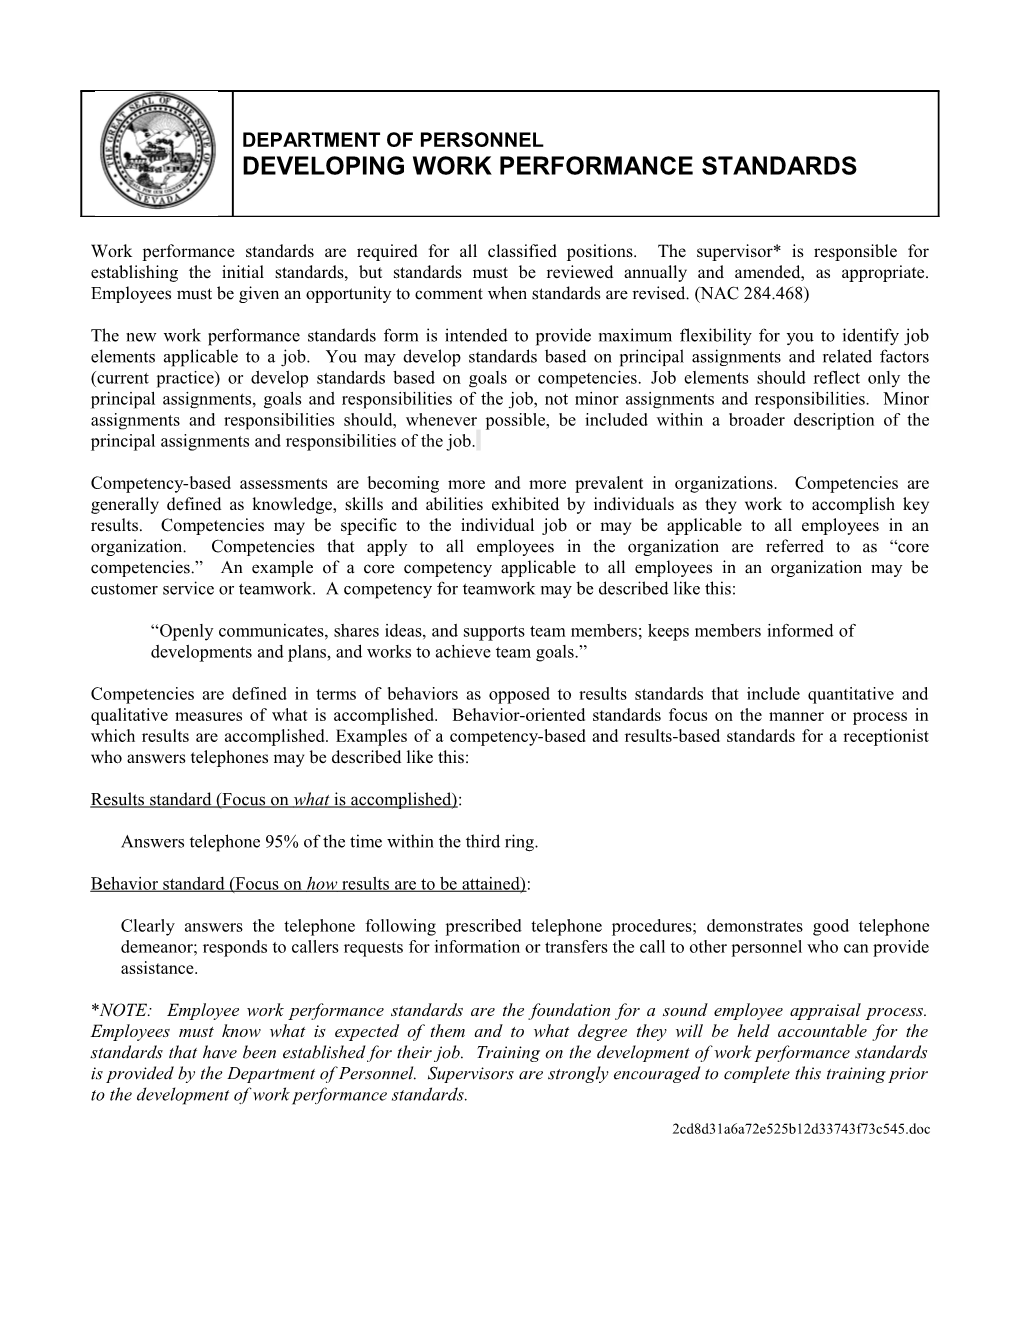 Instructions for the Completion of Work Performance Standards